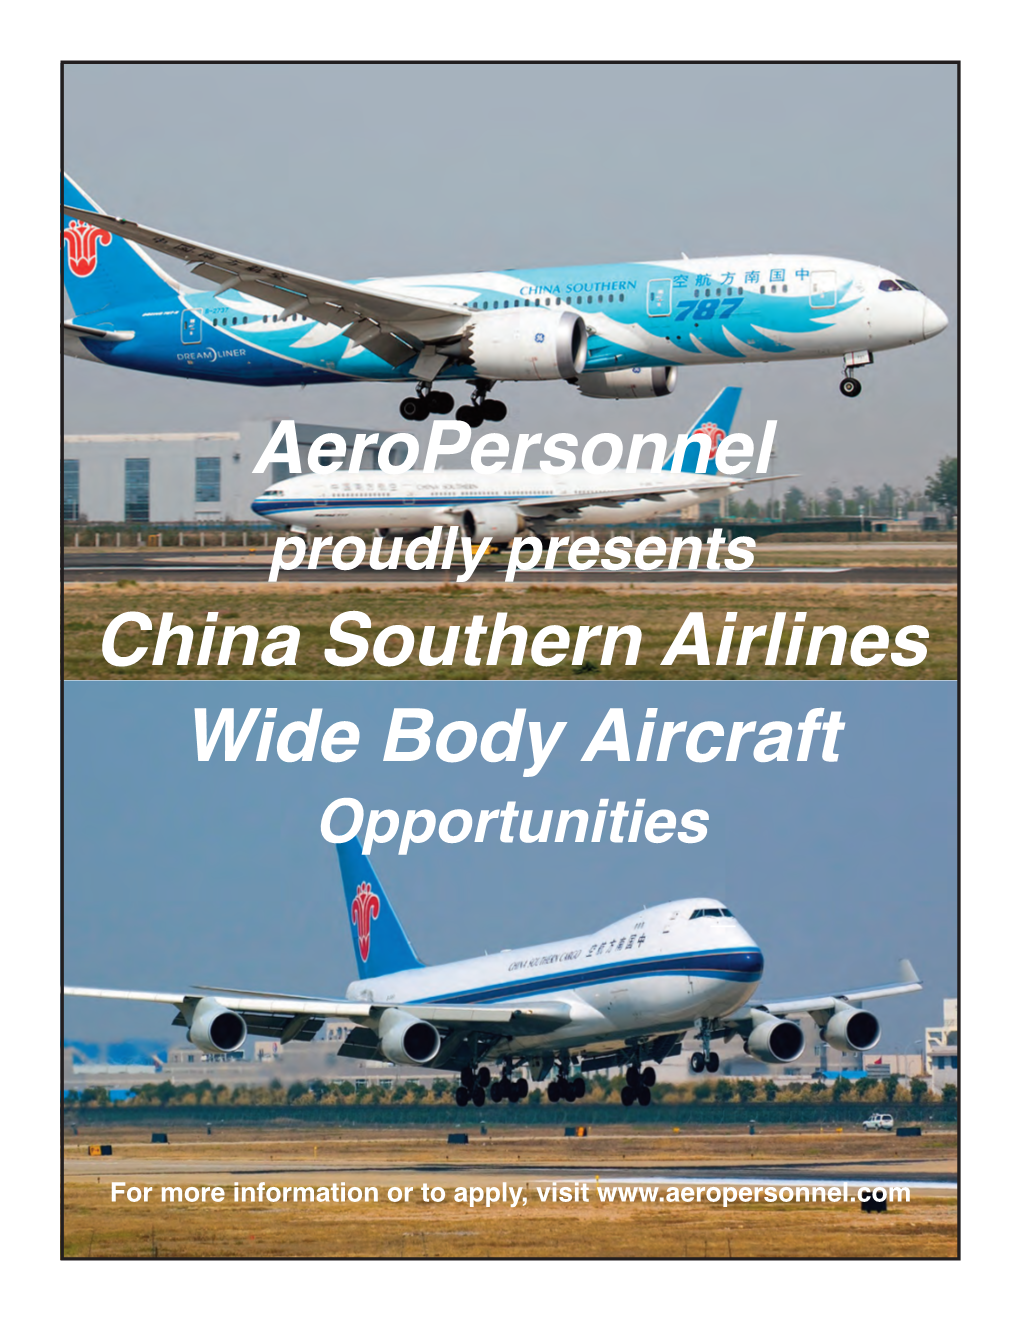 Aeropersonnel China Southern Airlines Wide Body Aircraft